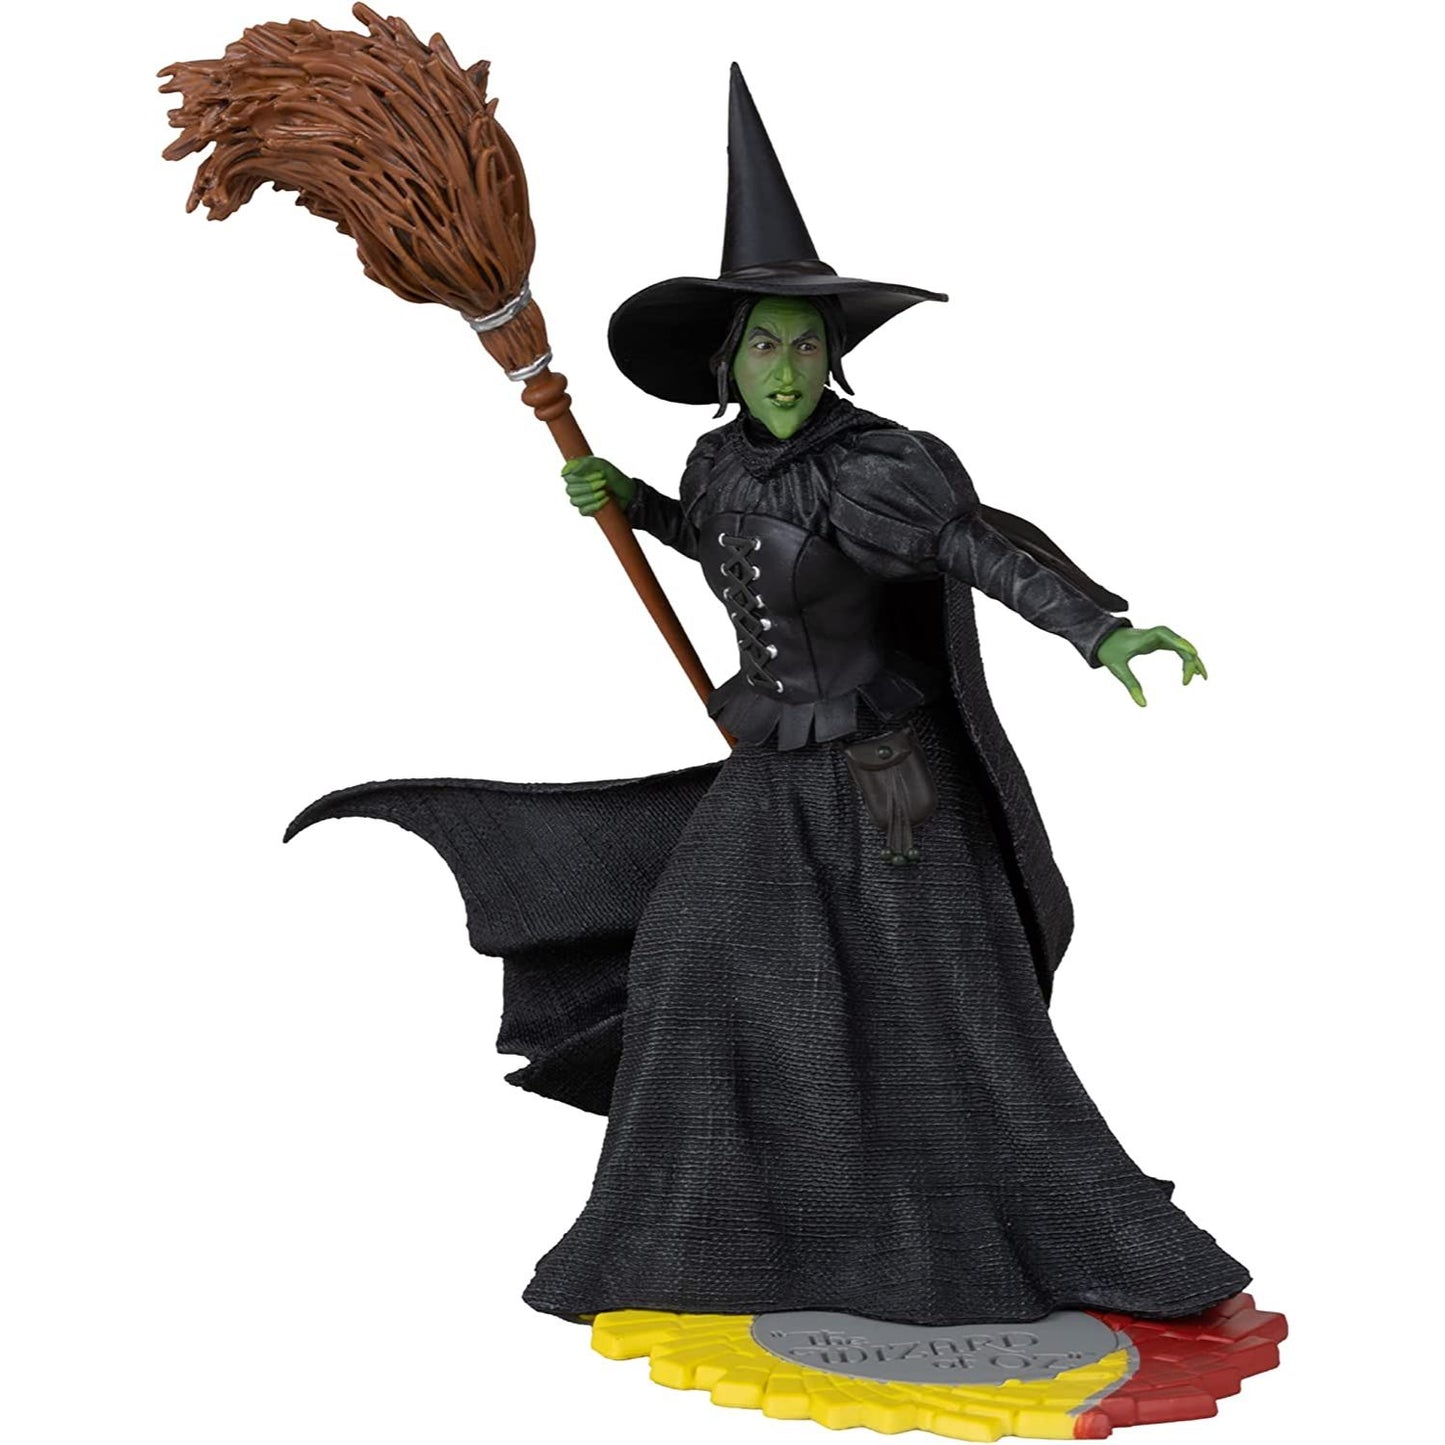 Movie Maniacs WB 100: The Wizard Of Oz Wicked Witch of the West 6-Inch